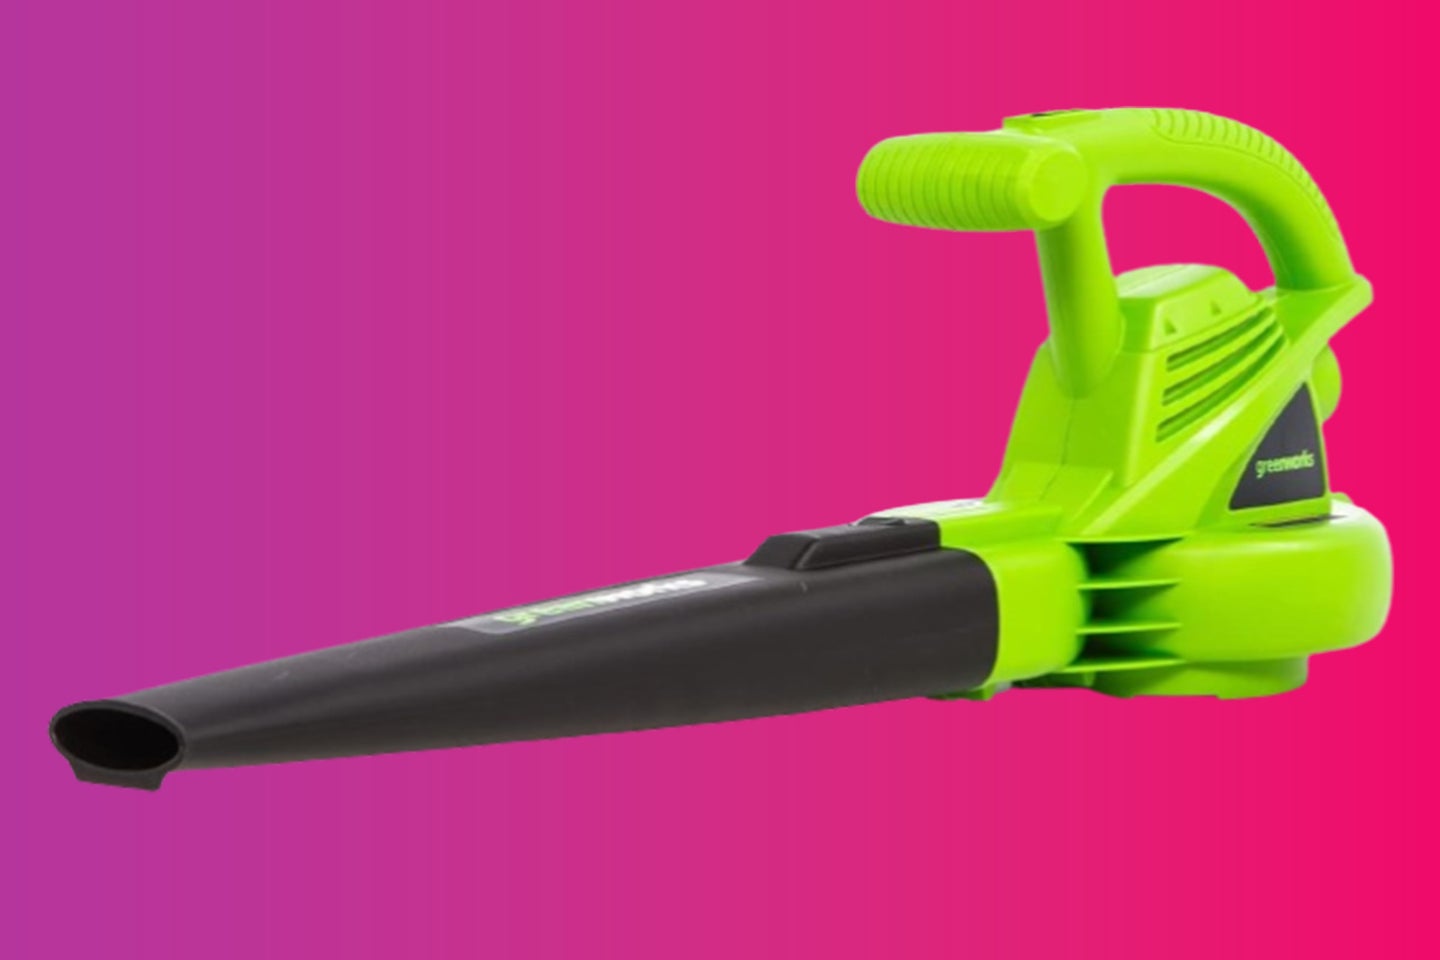 A Greenworks leafblower on a purple and pink gradient background